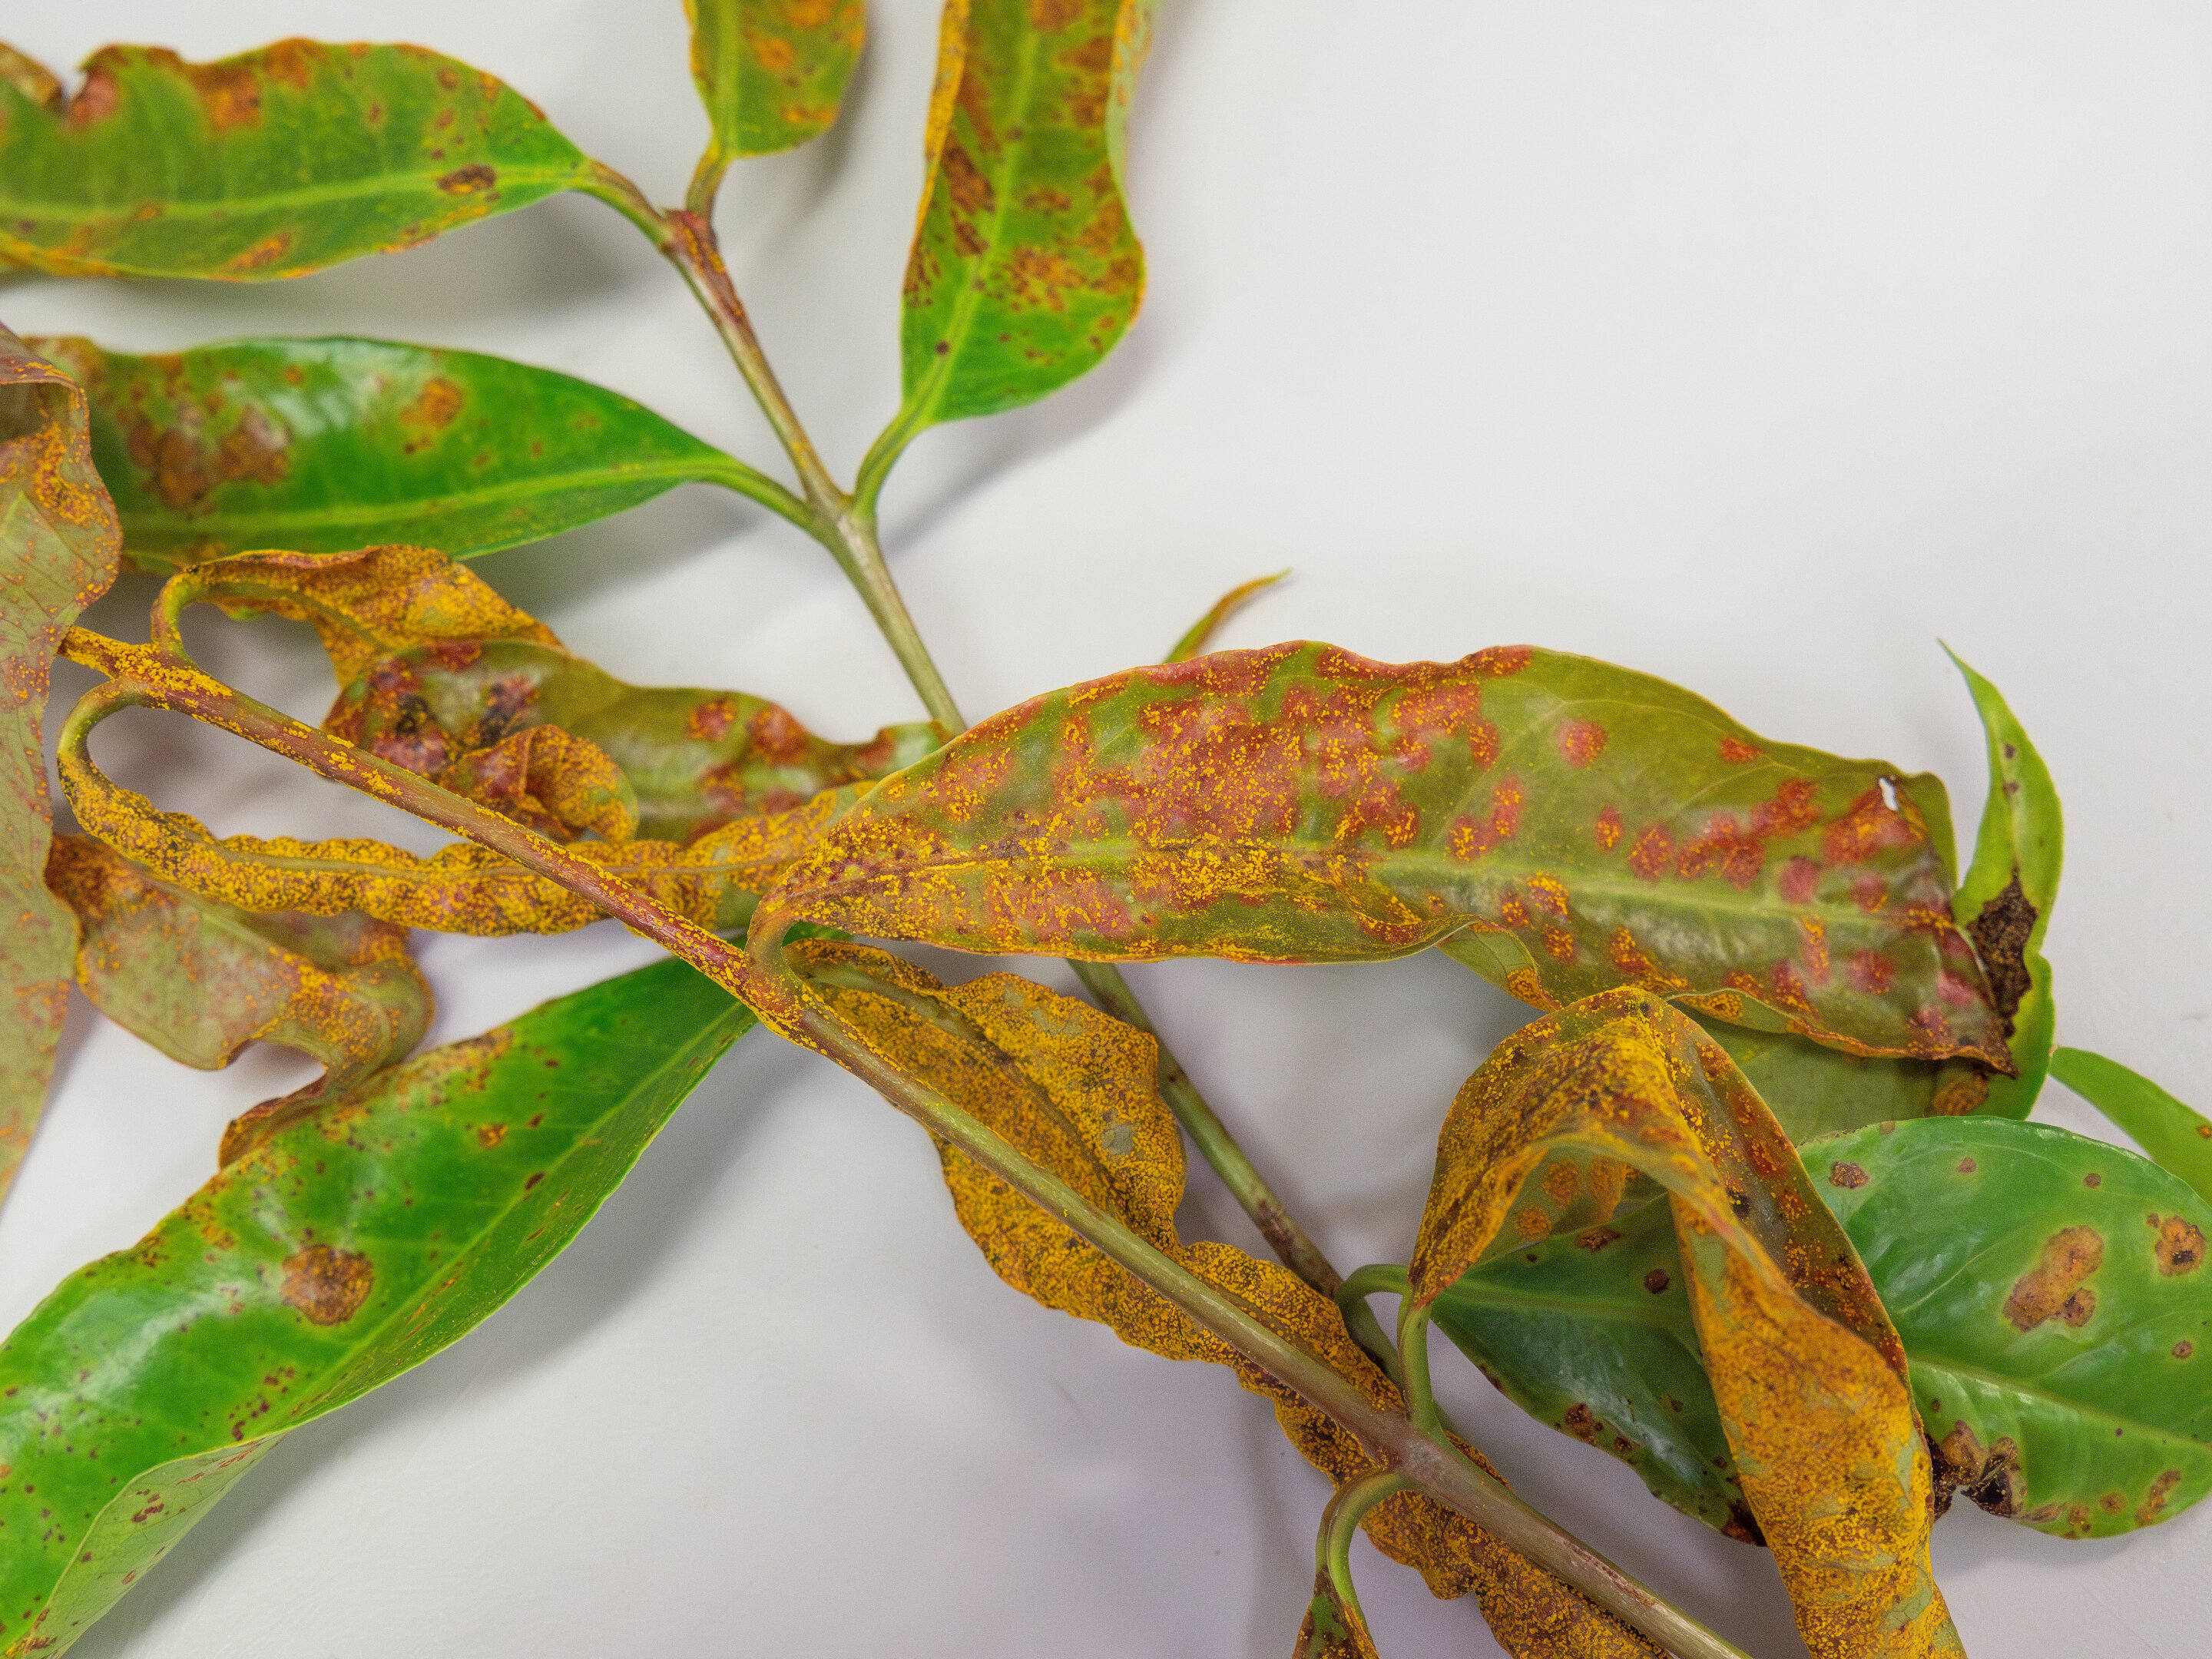 #High-tech spray can prevent and cure rusty plant threat